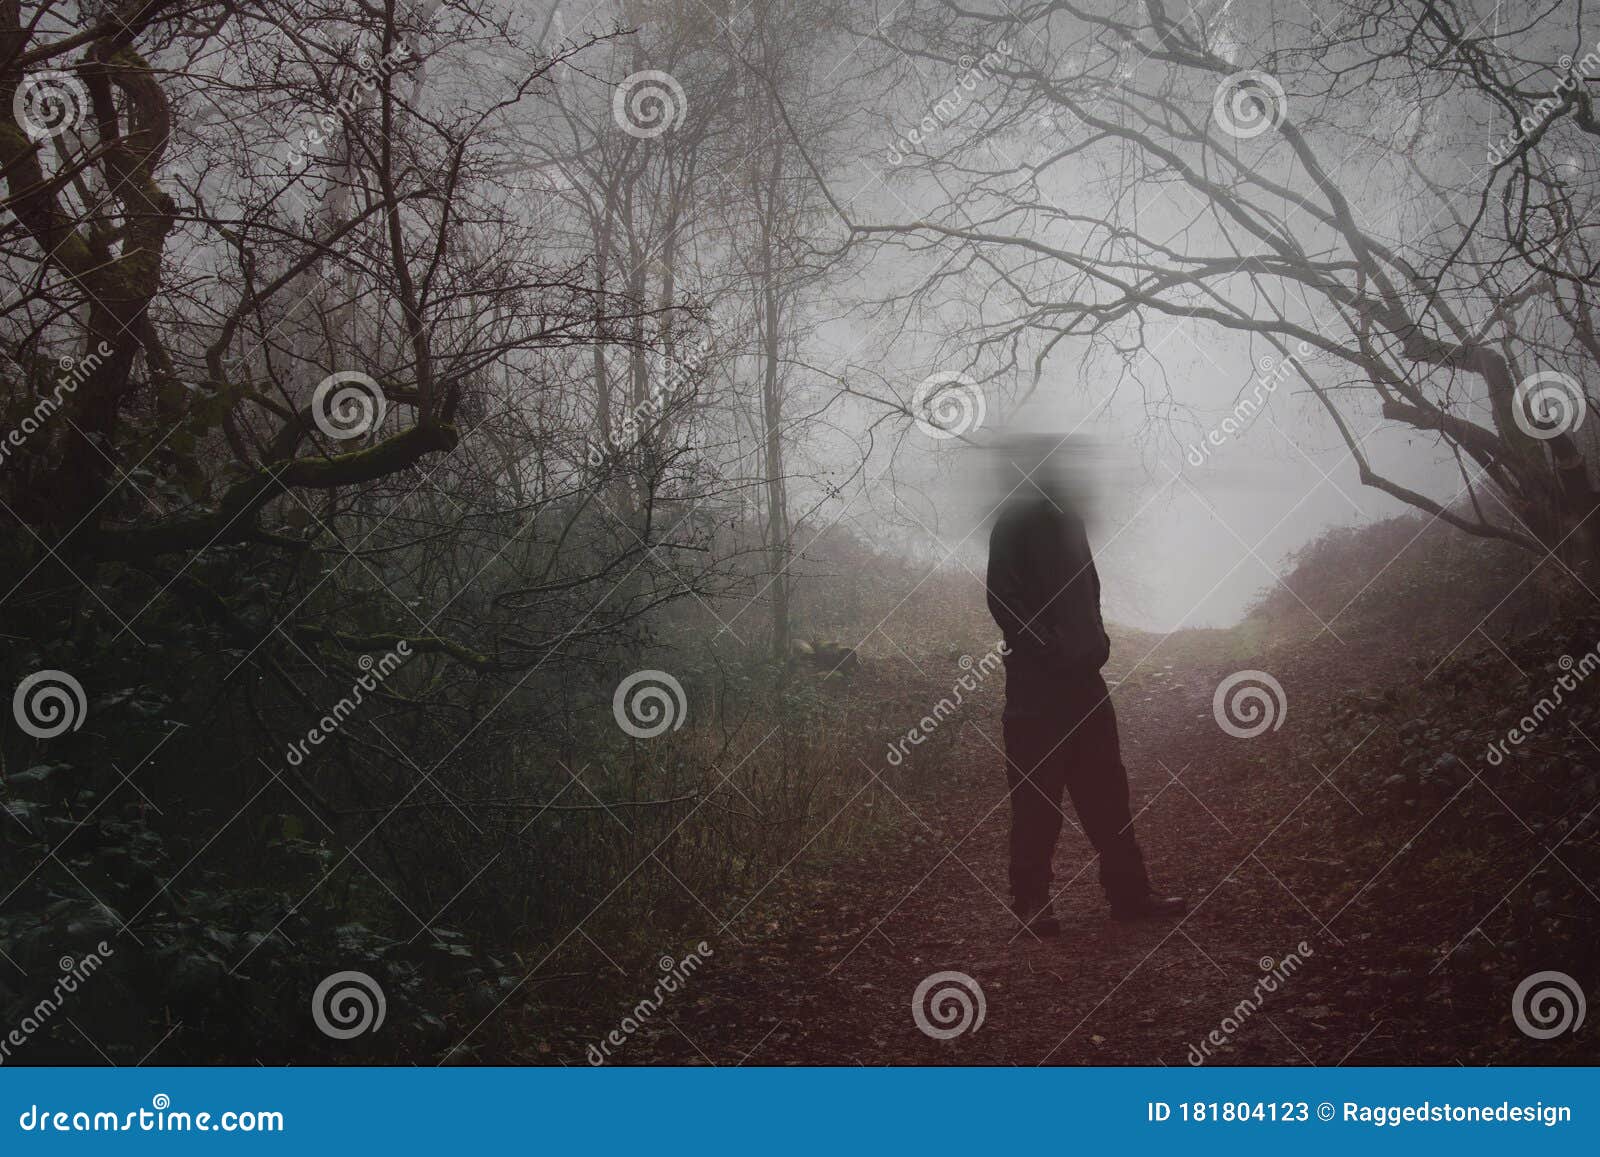 A Moody Figure with a Blurred Head Standing in a Forest on a Foggy ...